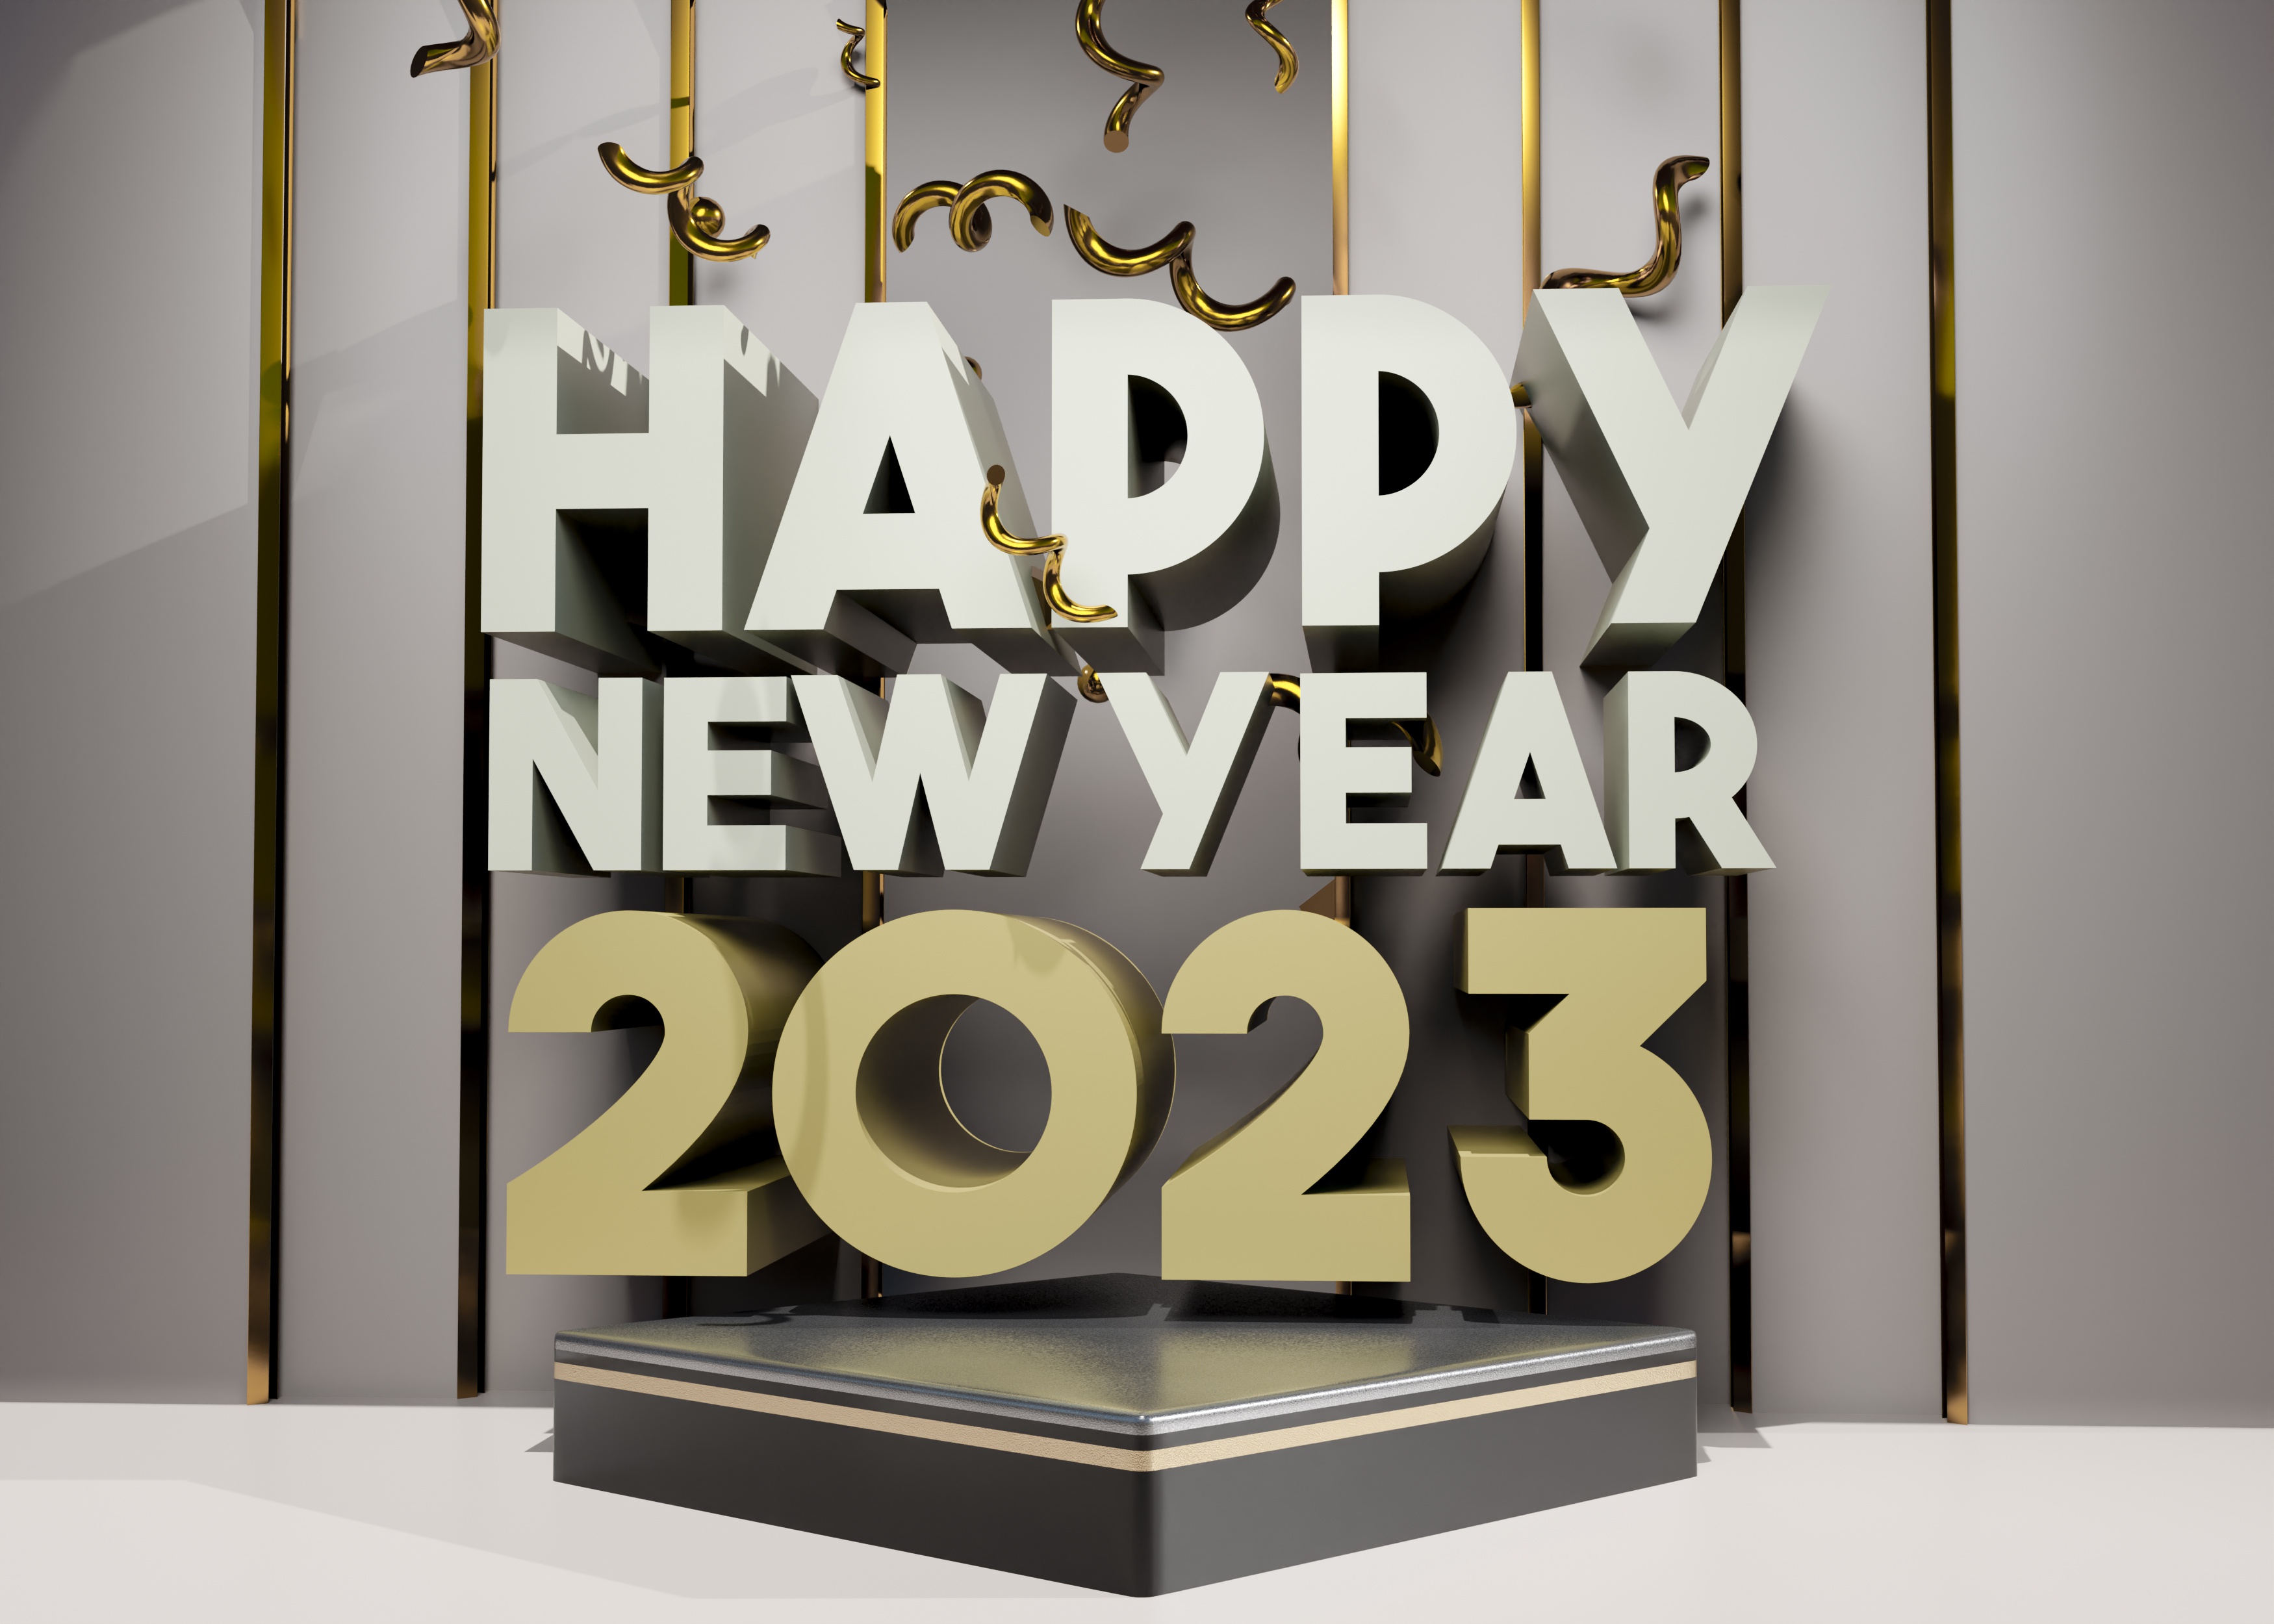 New Year Holiday 2023 Year Typography 3500x2500